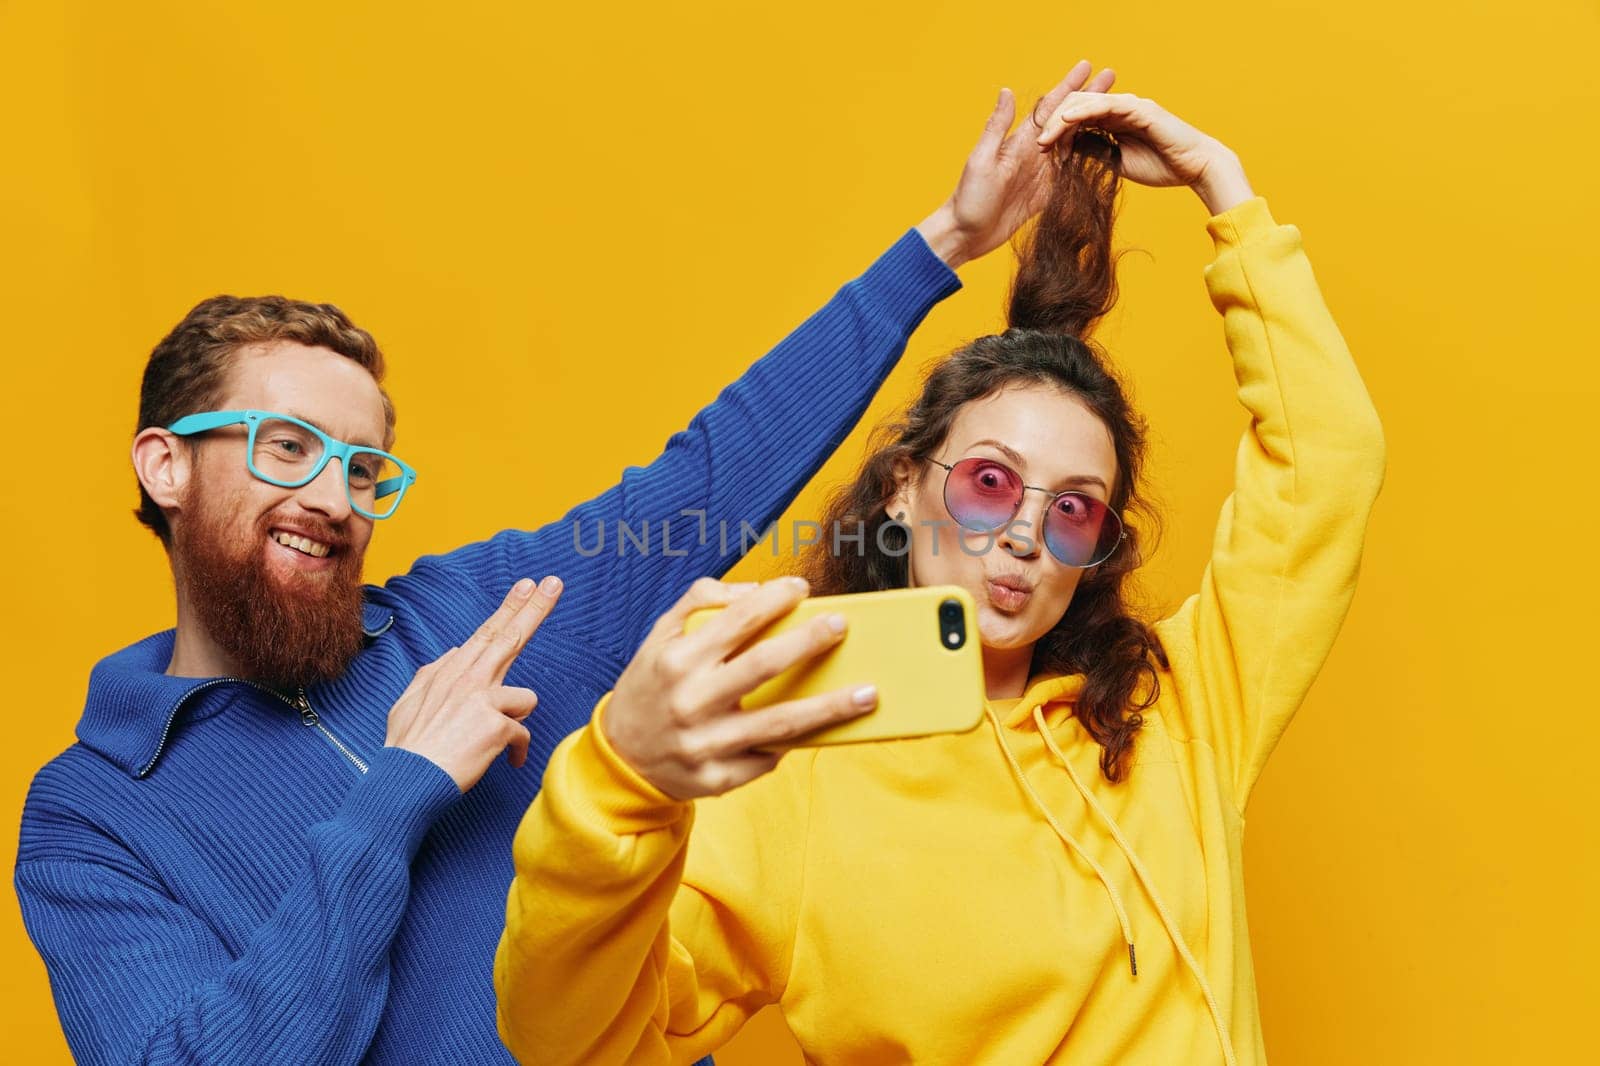 Woman and man funny couple with phones in hand social networking and communication crooked do selfies smile fun, on yellow background. The concept of real family relationships, freelancers, work online. High quality photo